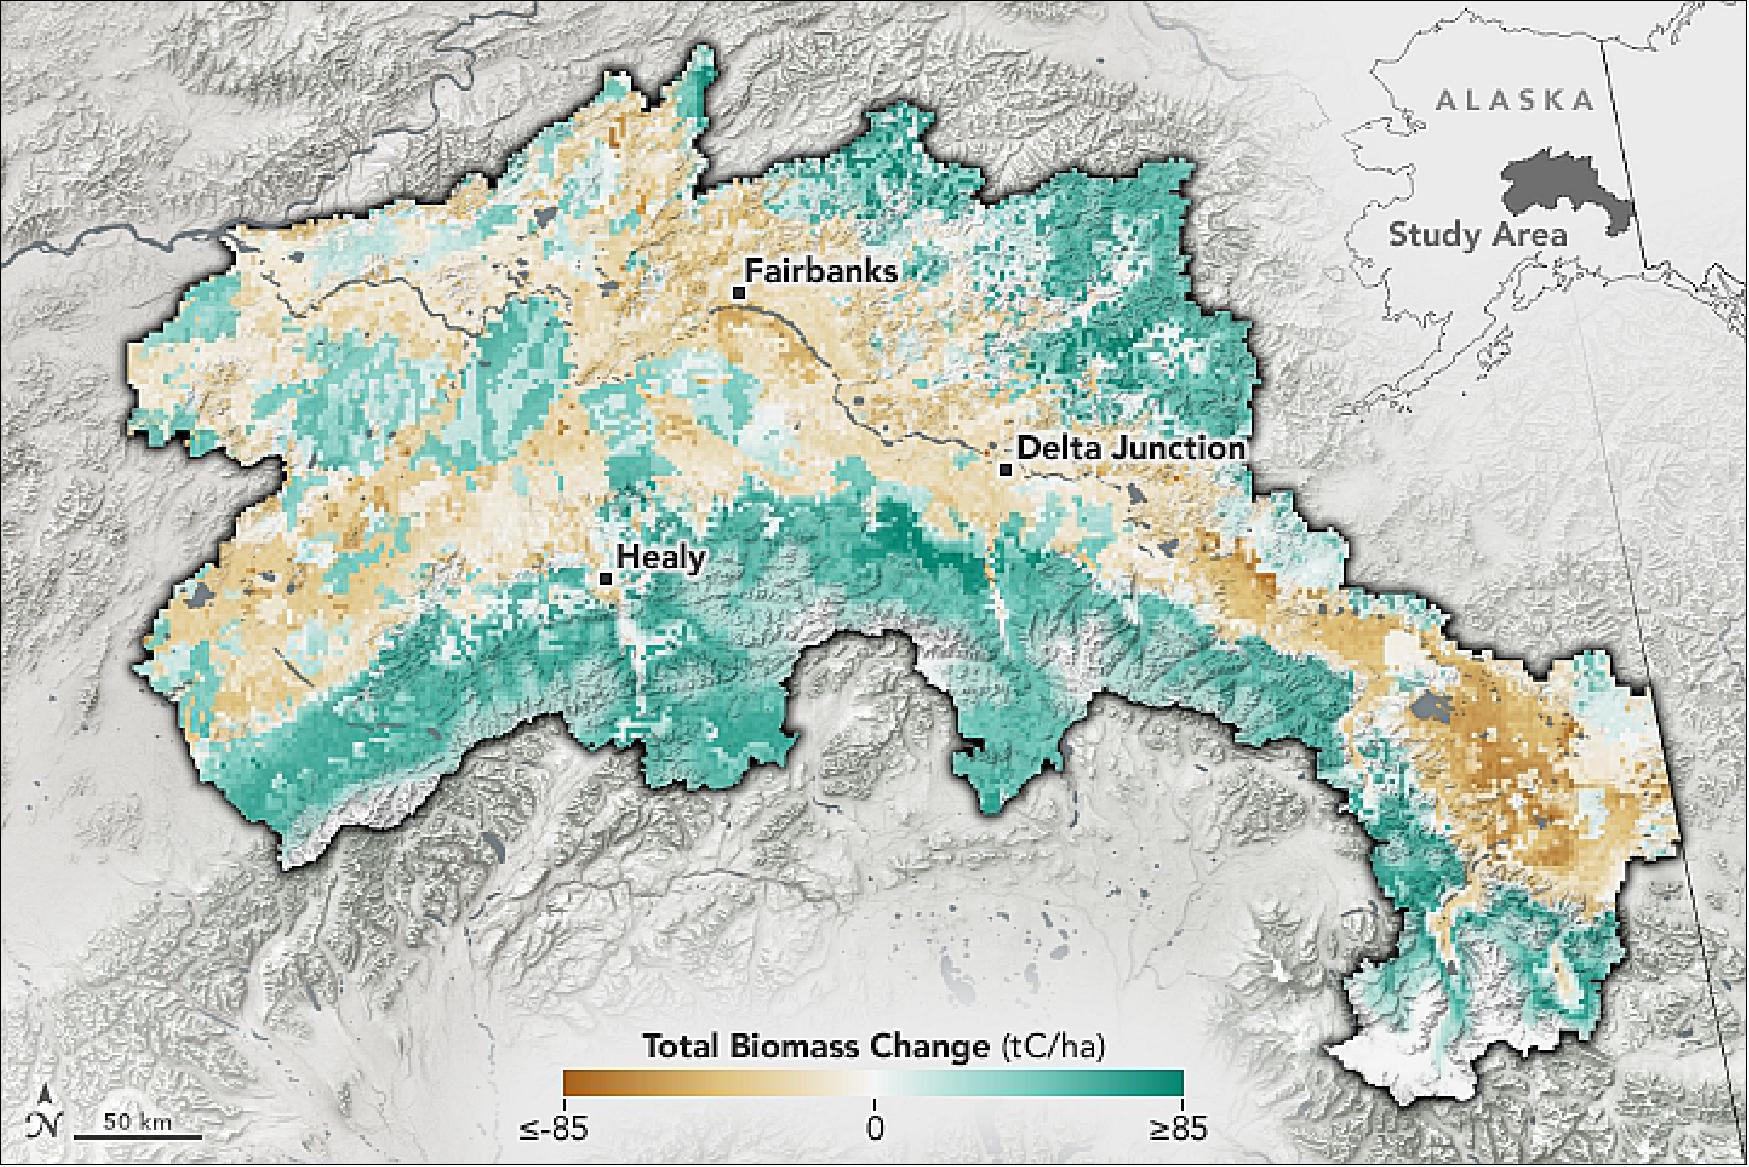 Figure 12: The map shows the projected gain or loss of biomass across a study area in central Alaska; it is based on the climate scenario where greenhouse gas emissions continue to increase at present rates. Across the center of the region, drier areas lose trees and plants, while cooler, wetter areas and higher elevations see gains (image credit: NASA Earth Observatory image by Joshua Stevens, using data courtesy of Foster, A. C., et al. (2019), and data from NASA/METI/AIST/Japan Space Systems, and U.S./Japan ASTER Science Team. Story by Jessica Merzdorf, NASA/GSFC)